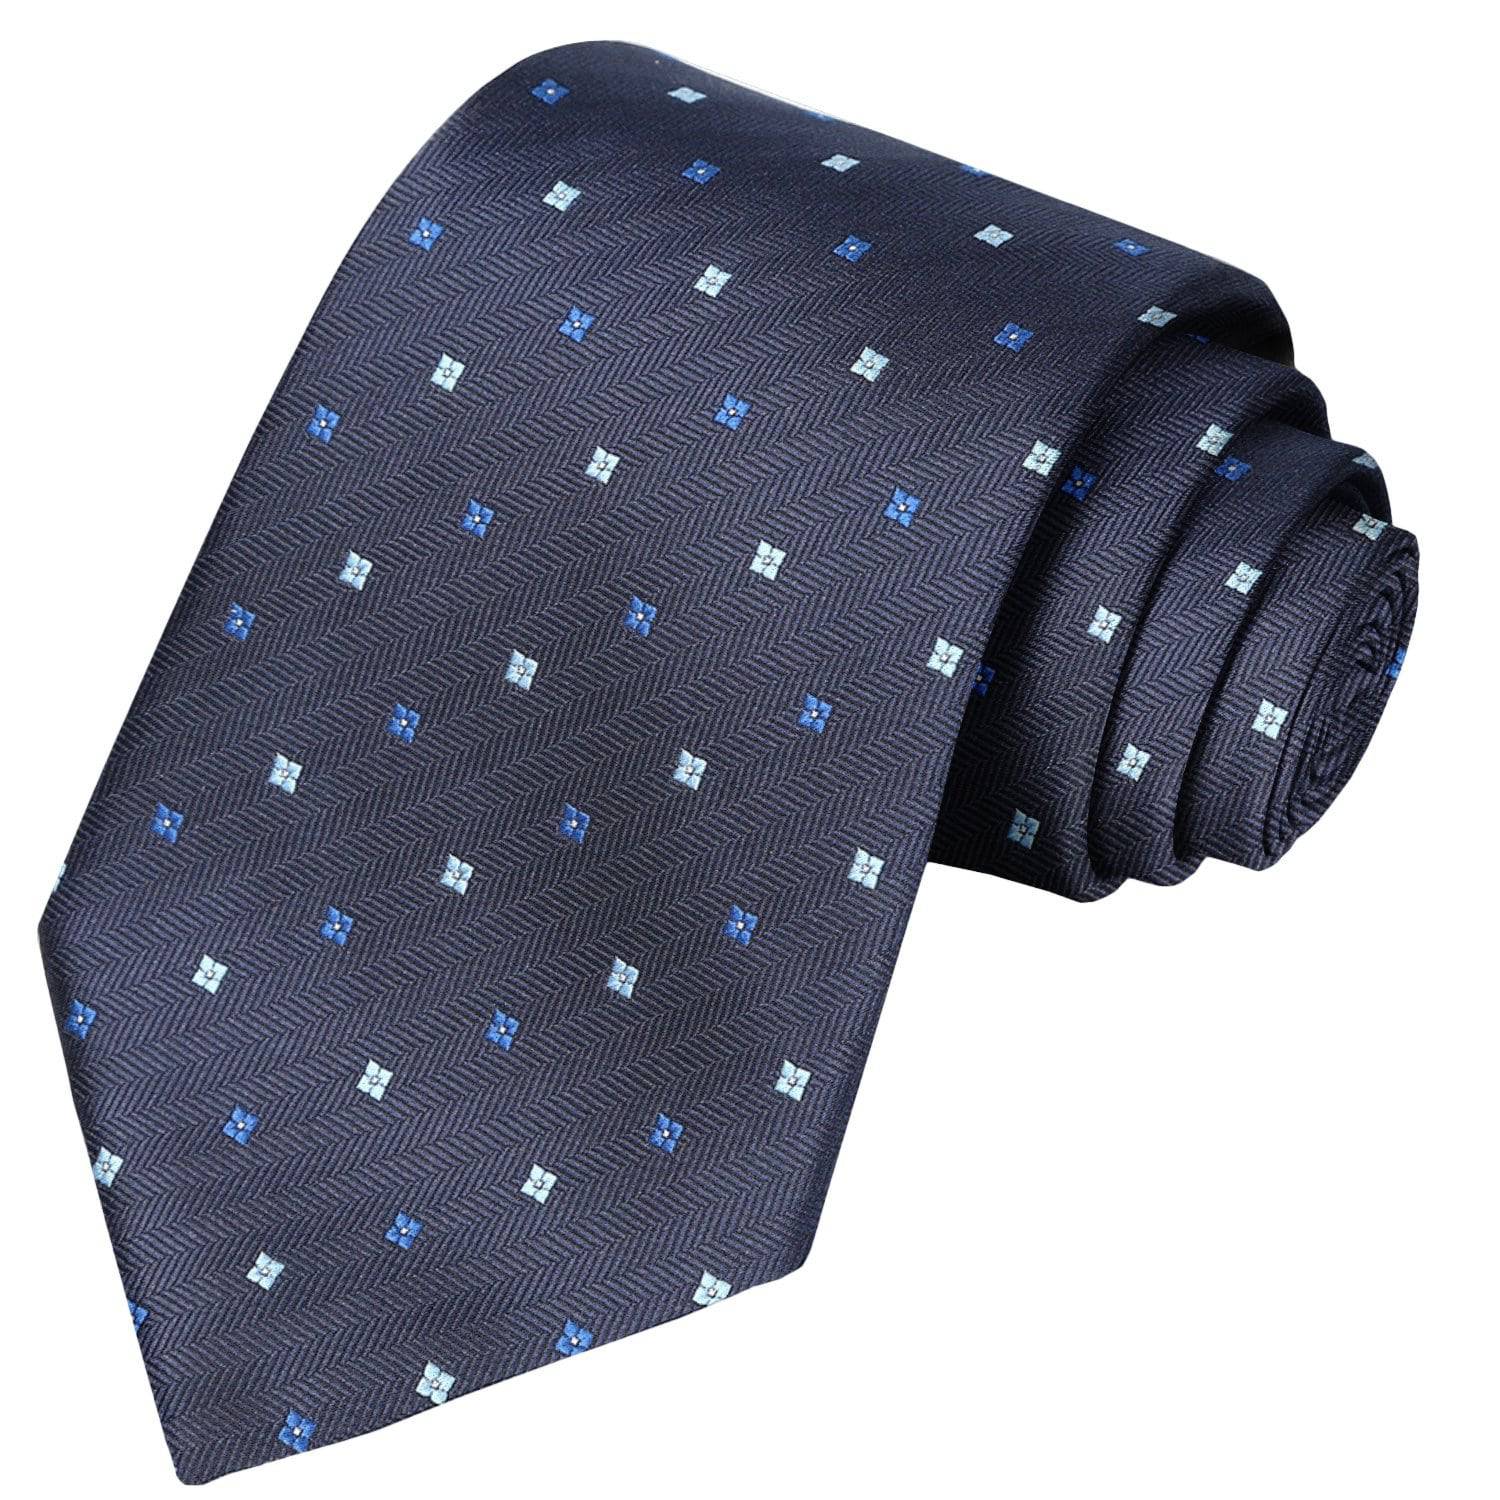 Maya-Egyptian on Space Blue Floral Tie - Tie, bowtie, pocket square  | Kissties